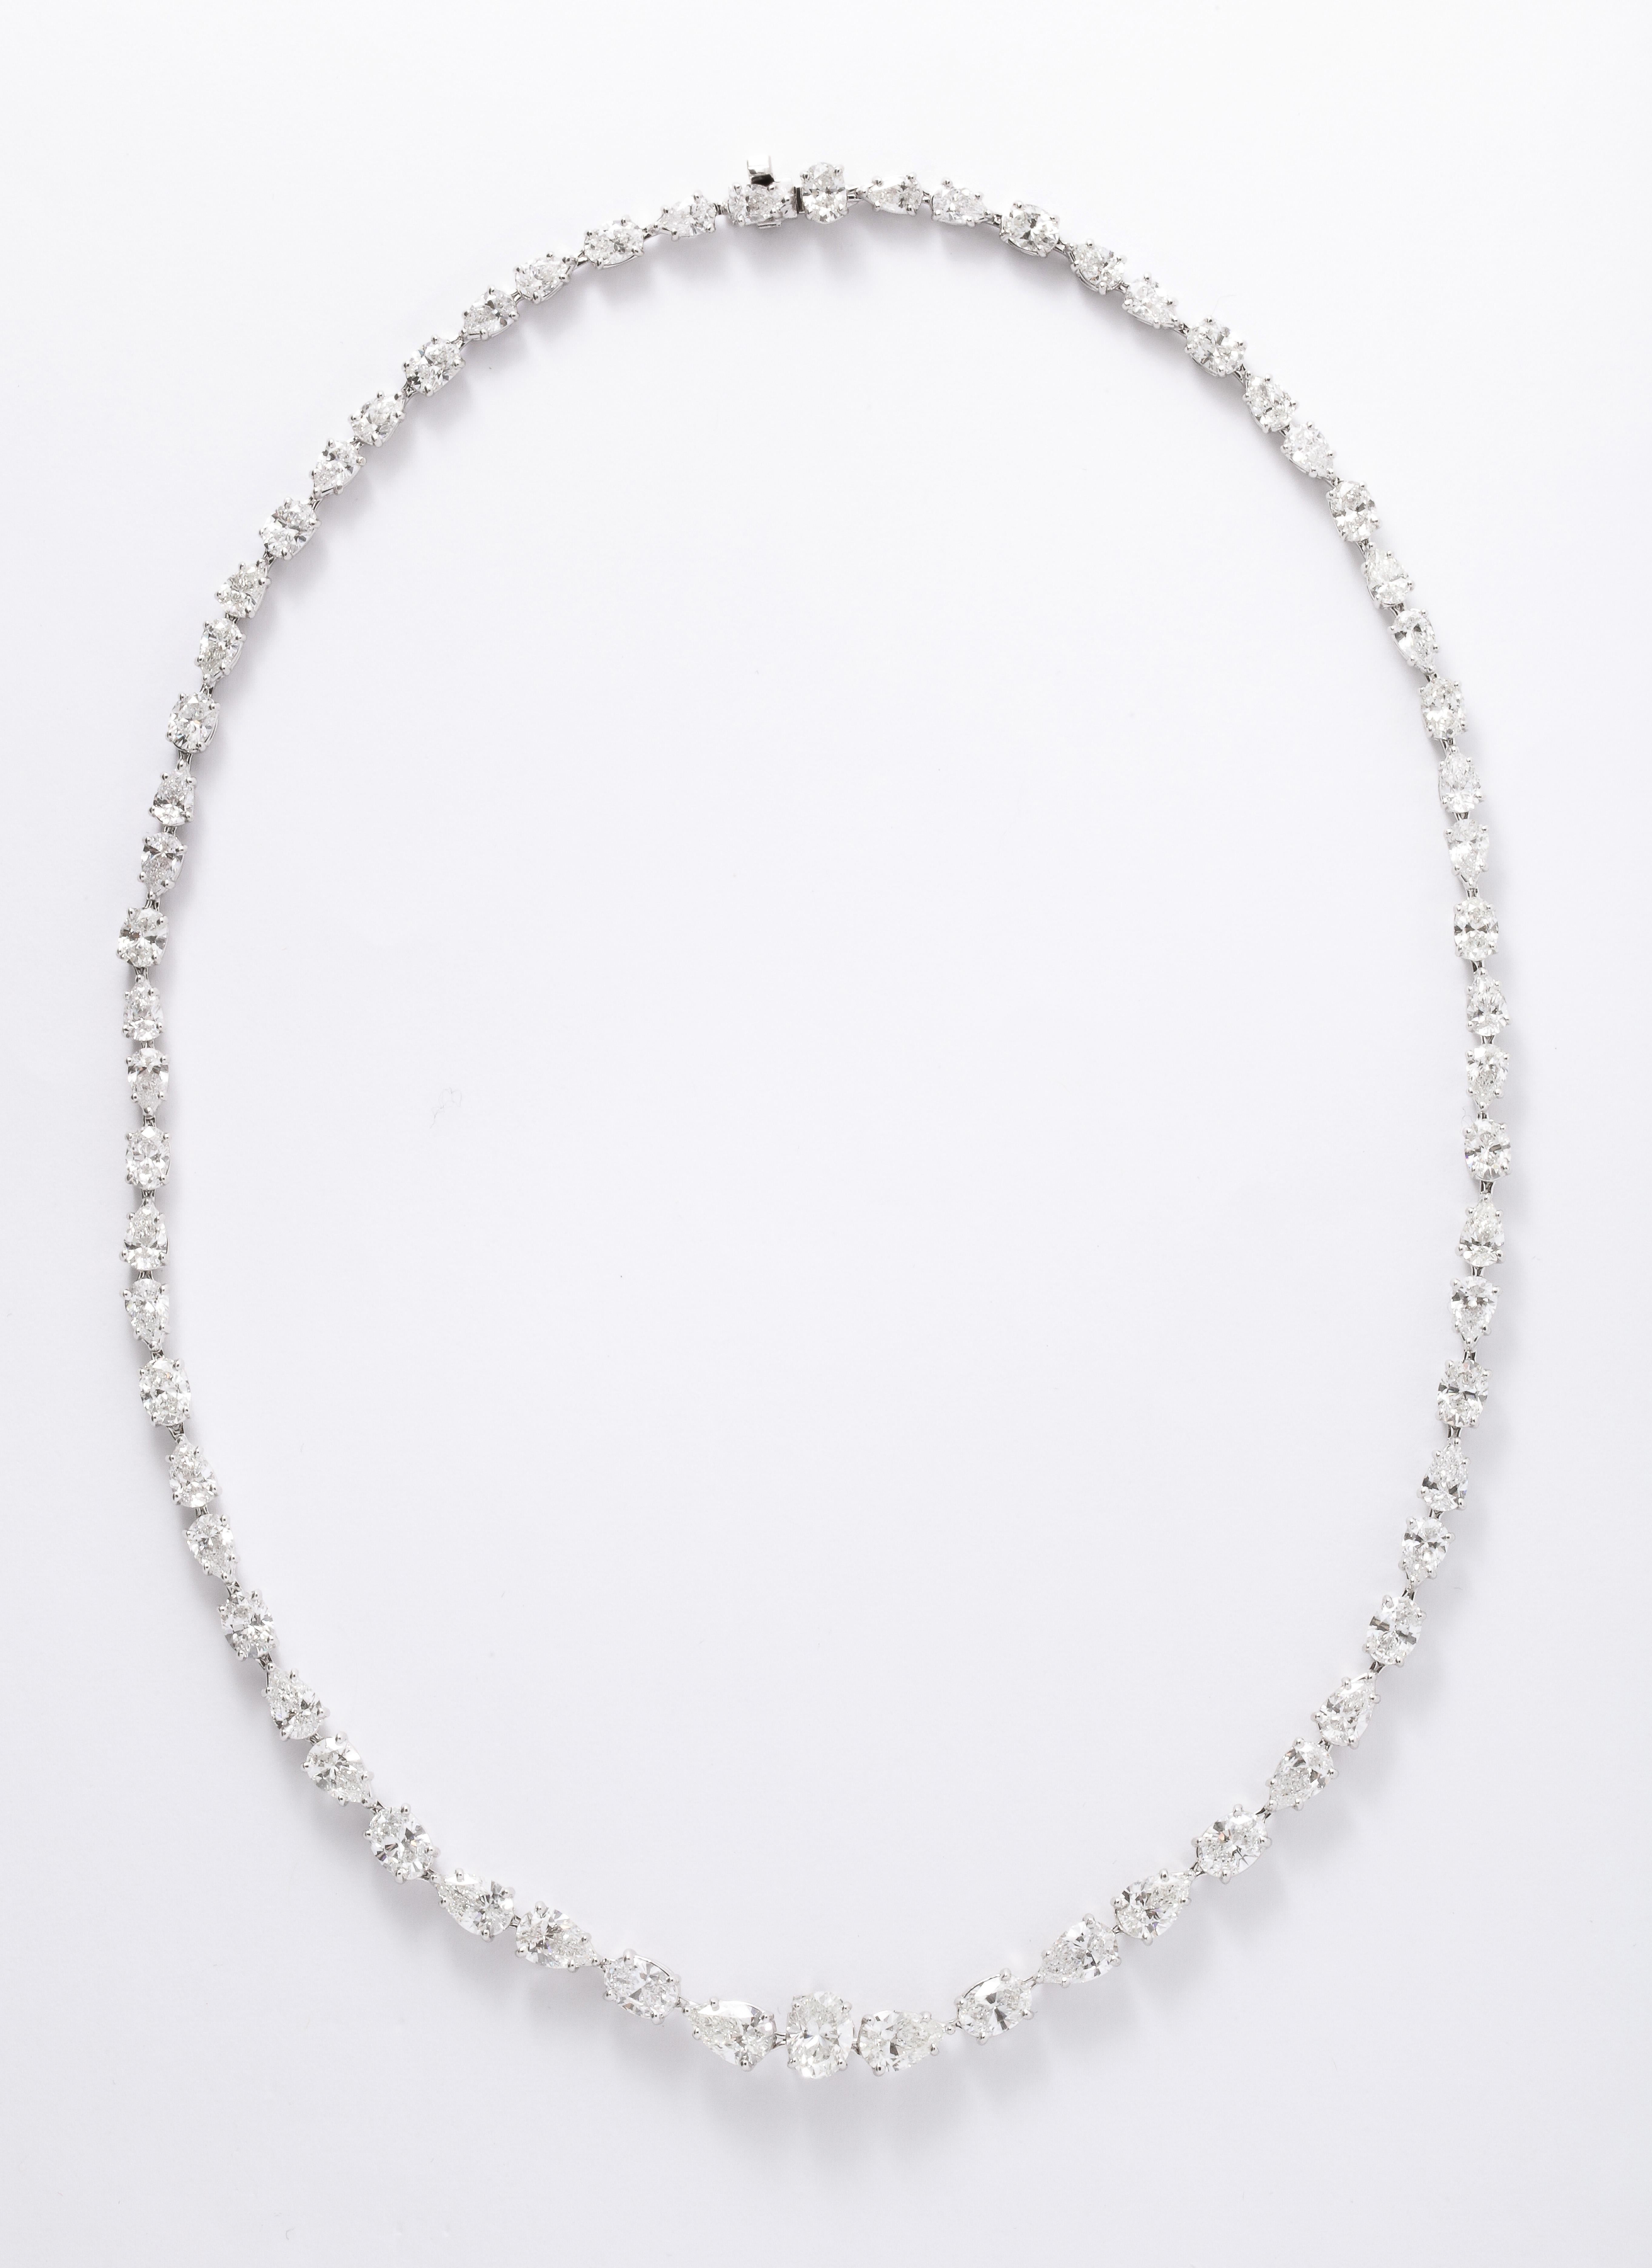 
A EXCEPTIONAL piece! 

31.85 carats of white pear shape and oval cut diamonds set in 18k white gold.

The necklace features an impeccably designed removable drop 

Diamond sizes from over 1 carat in the center to .20, approximately. 

16 inch